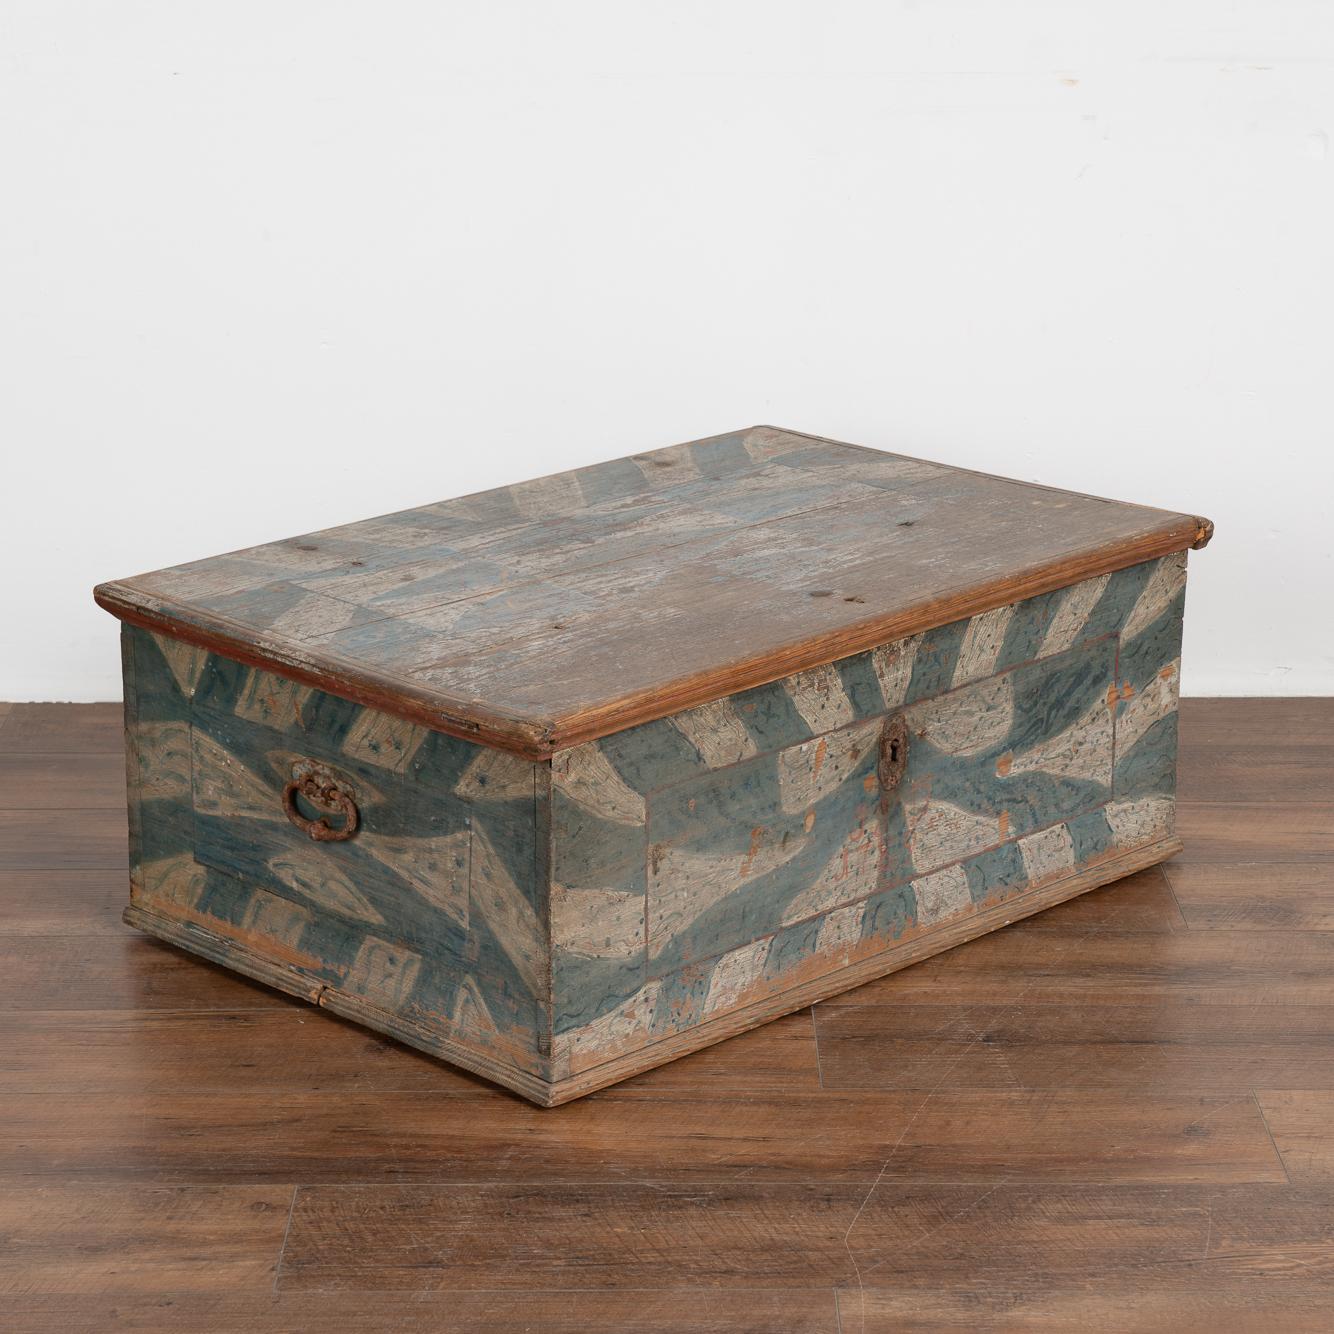 Generations of use are revealed in the distressed wear to the original blue and white folk art painted finish in this flat top pine trunk. Captured perfectly here, this highly sought after patina is always a special find, especially when dated